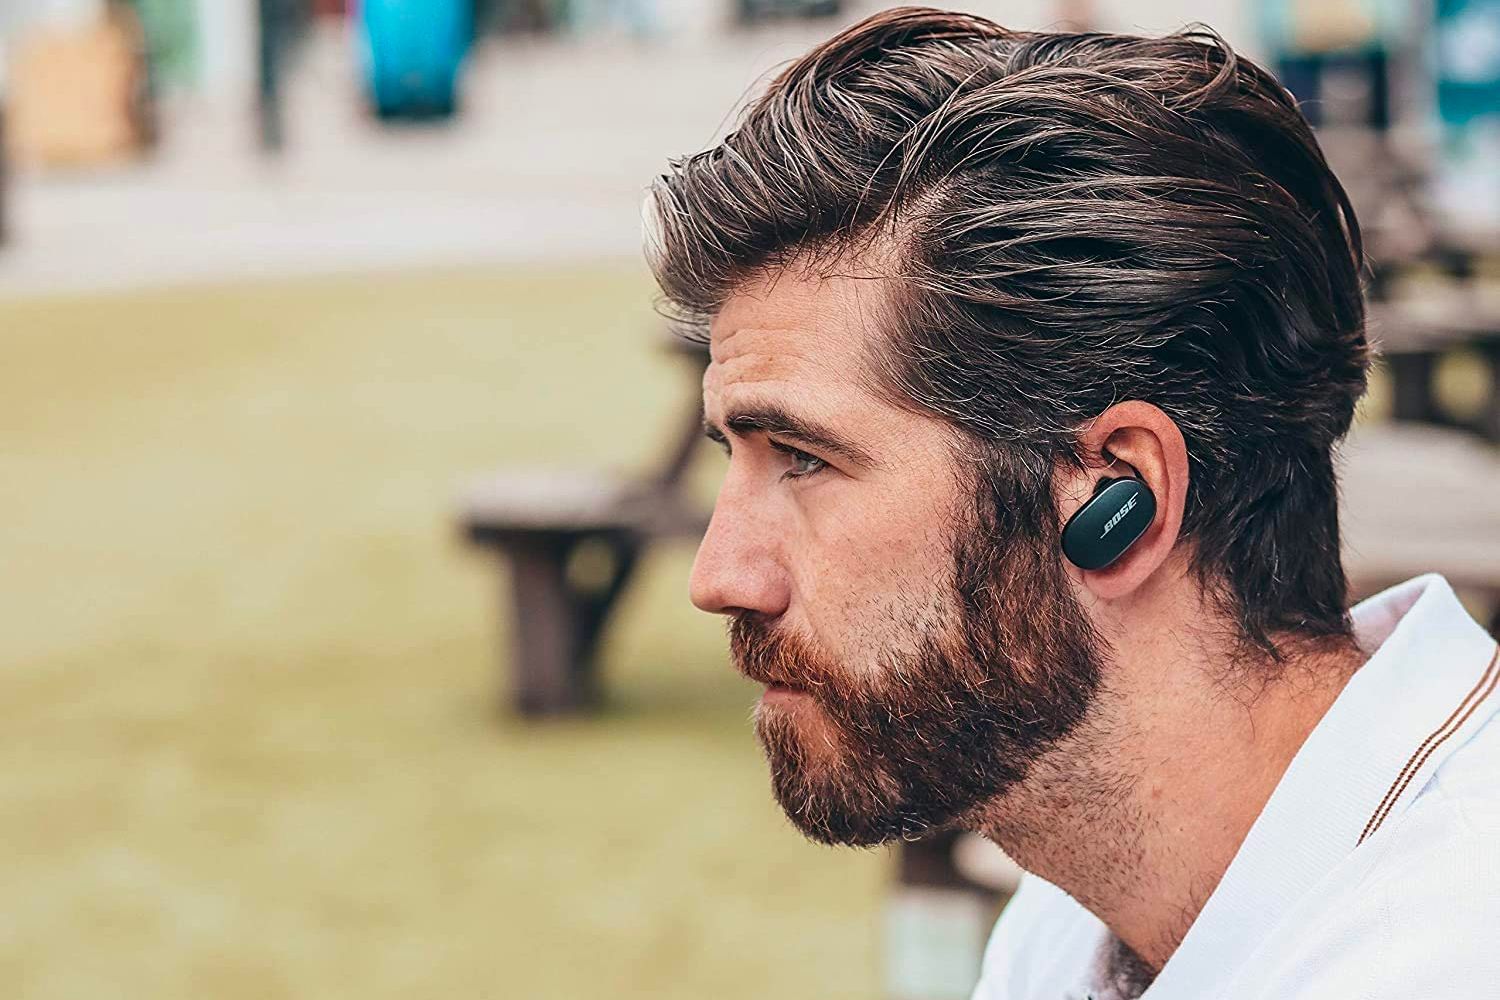 Deals Roundup Amazon 11/24: Bose QuietComfort Noise Cancelling Earbuds